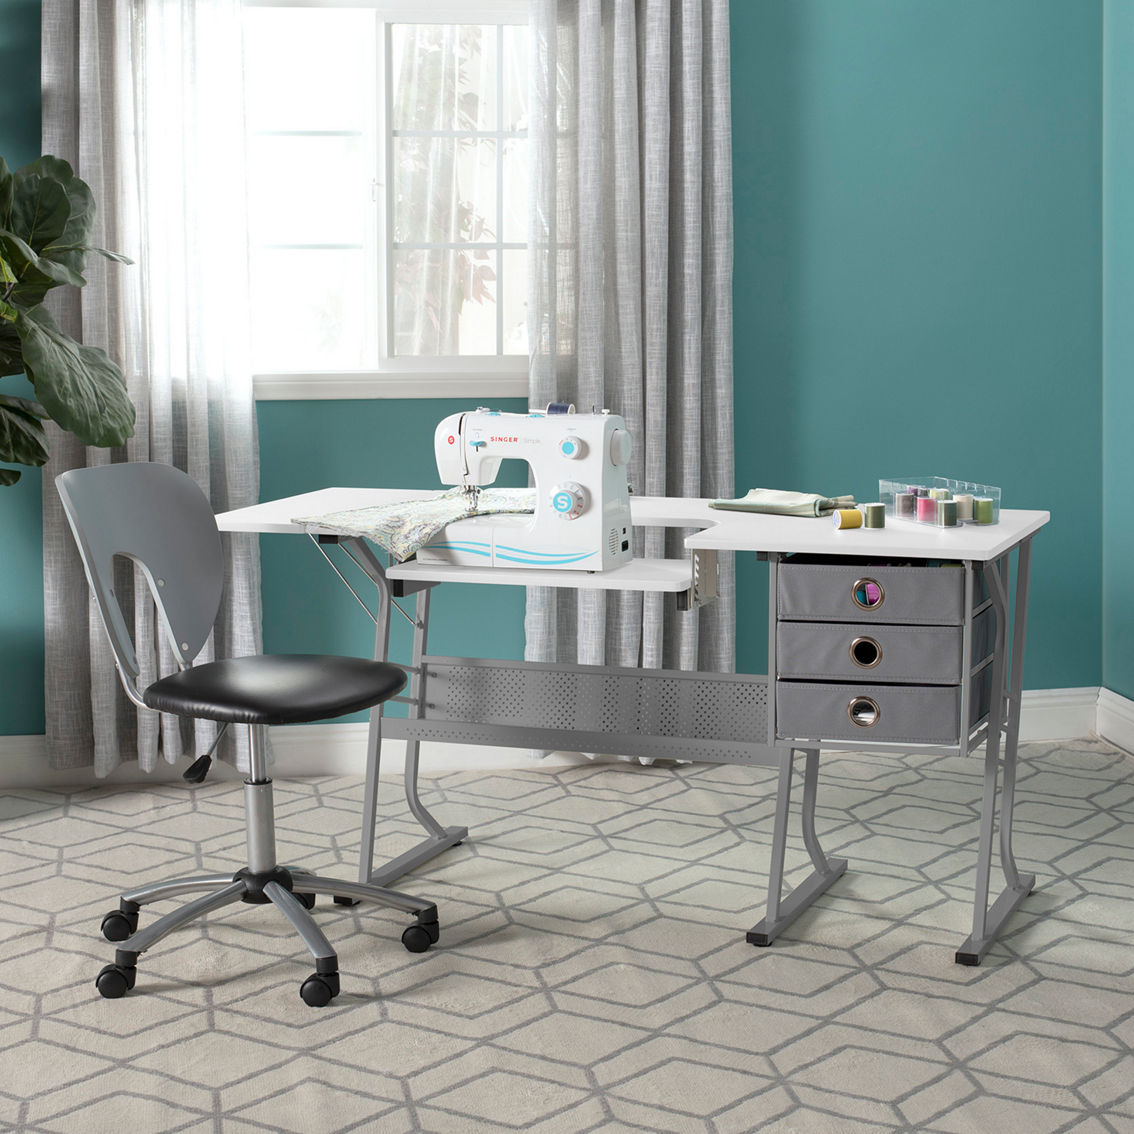 Studio Designs Sew Ready Eclipse Ultra Sewing Table - Image 8 of 8